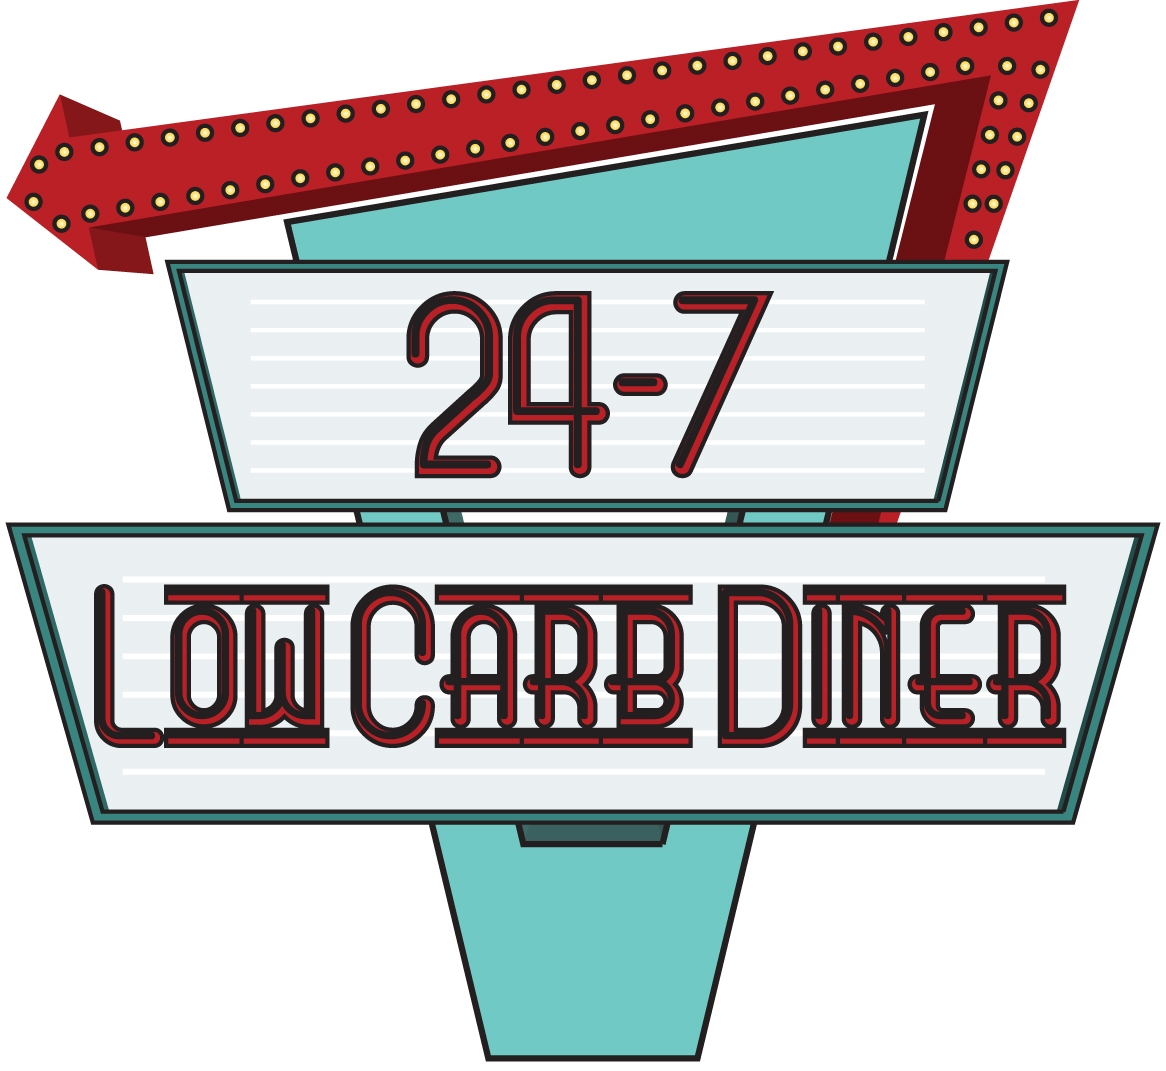 50s diner logo template Clip Art Library